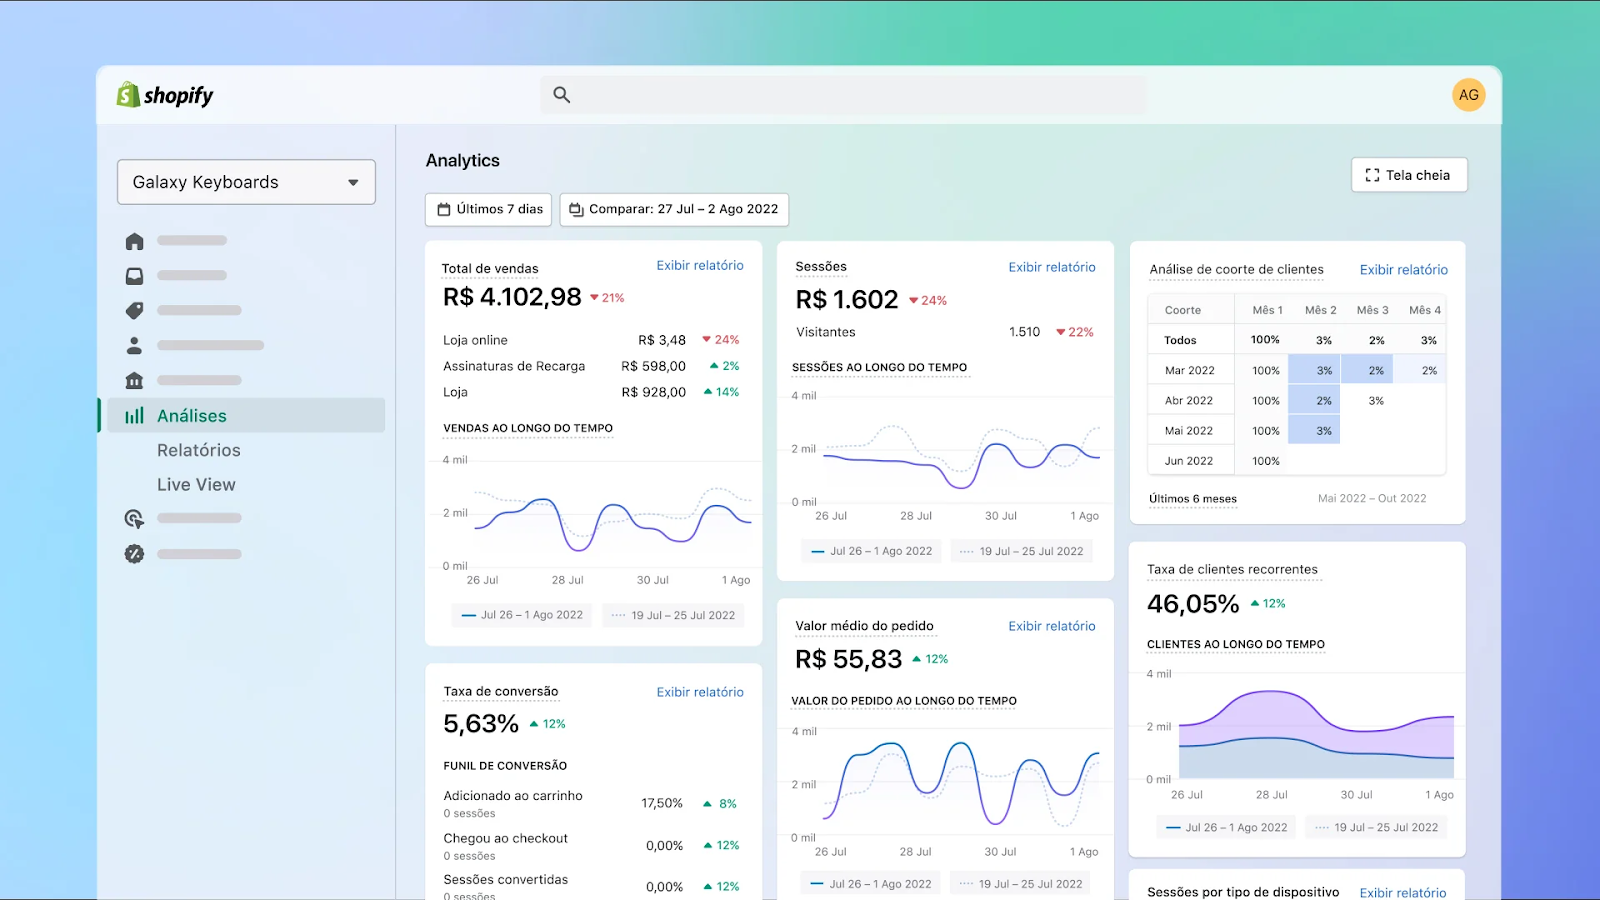 Shopify’s analytical dashboard